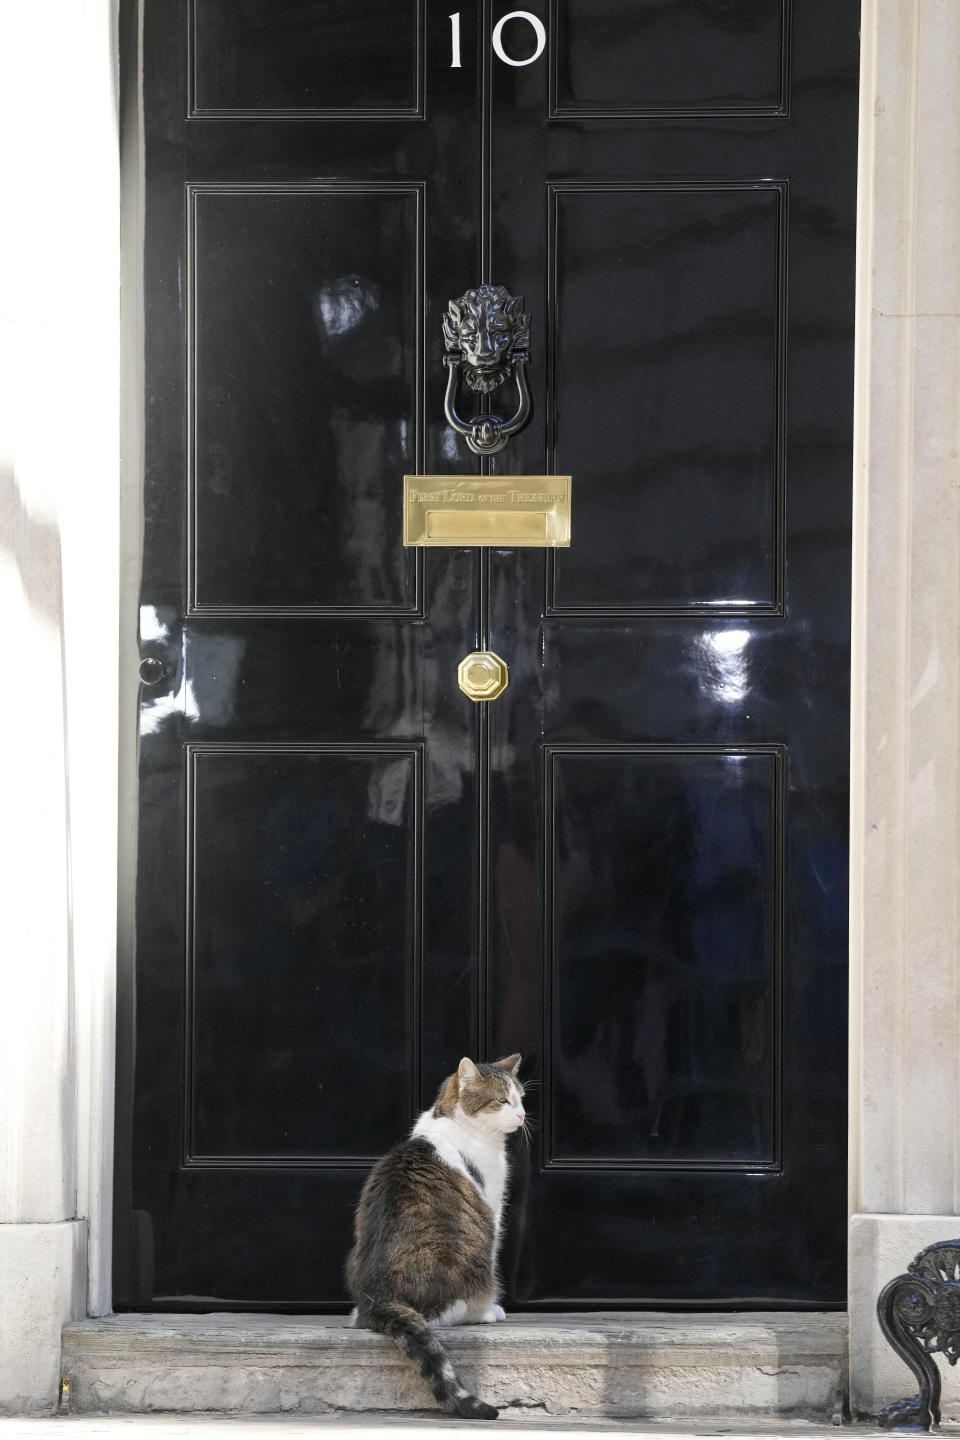 Larry the Cat, Britain's Chief Mouser to the Cabinet Office sits at the door to 10 Downing Street in London, Friday, July 8, 2022. Britain's Prime Minister Boris Johnson announced that less than three years after becoming prime minister, he was resigning and would remain in office only until a successor emerged.(AP Photo/Frank Augstein)